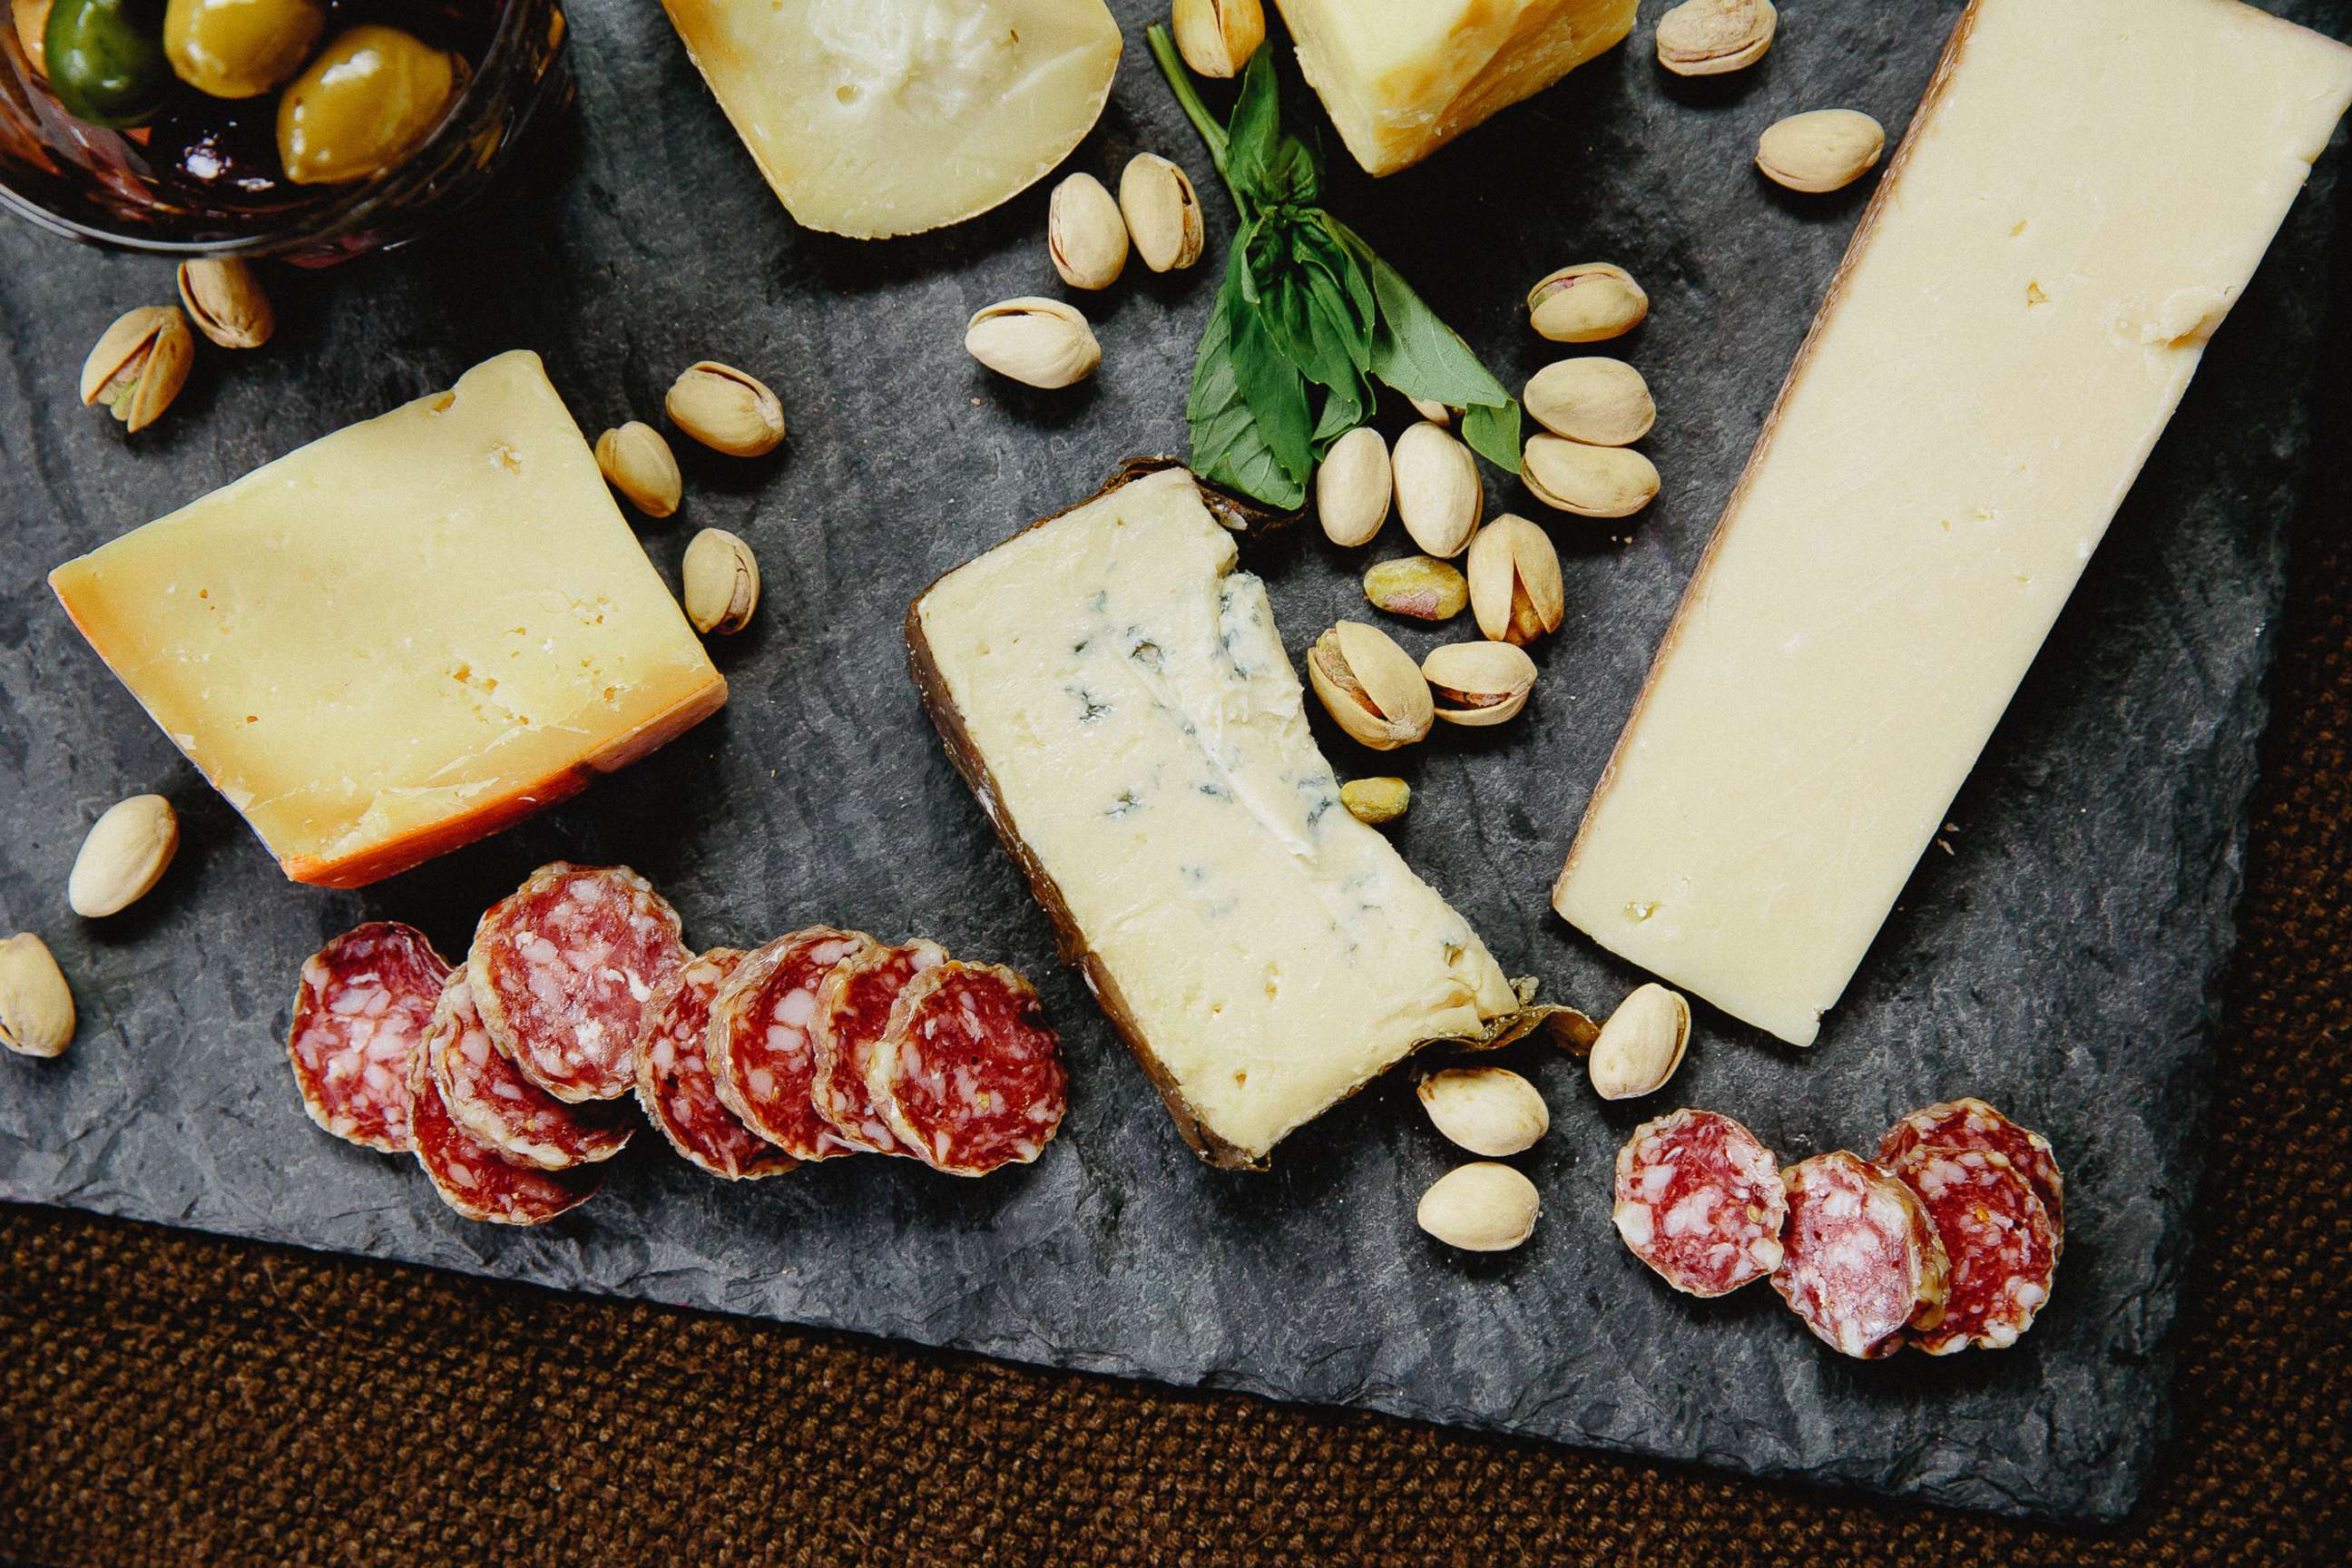 PHOTO: Meat, cheese and nuts on a slate board are seen in this stock photo.